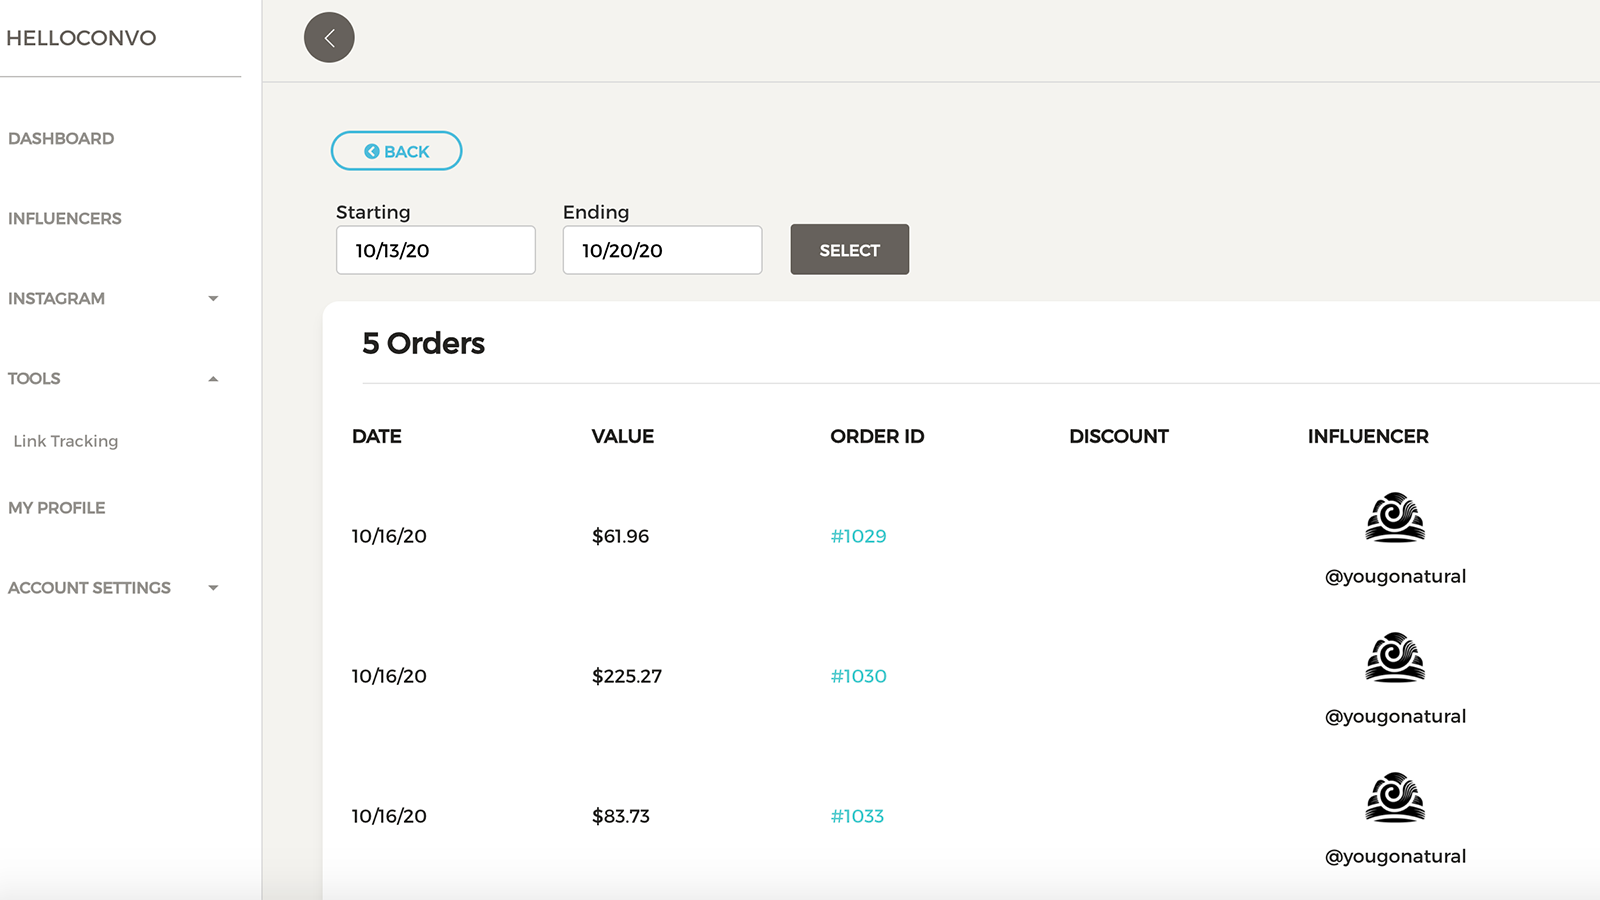 View sales reports showing your sales by influencer and discount